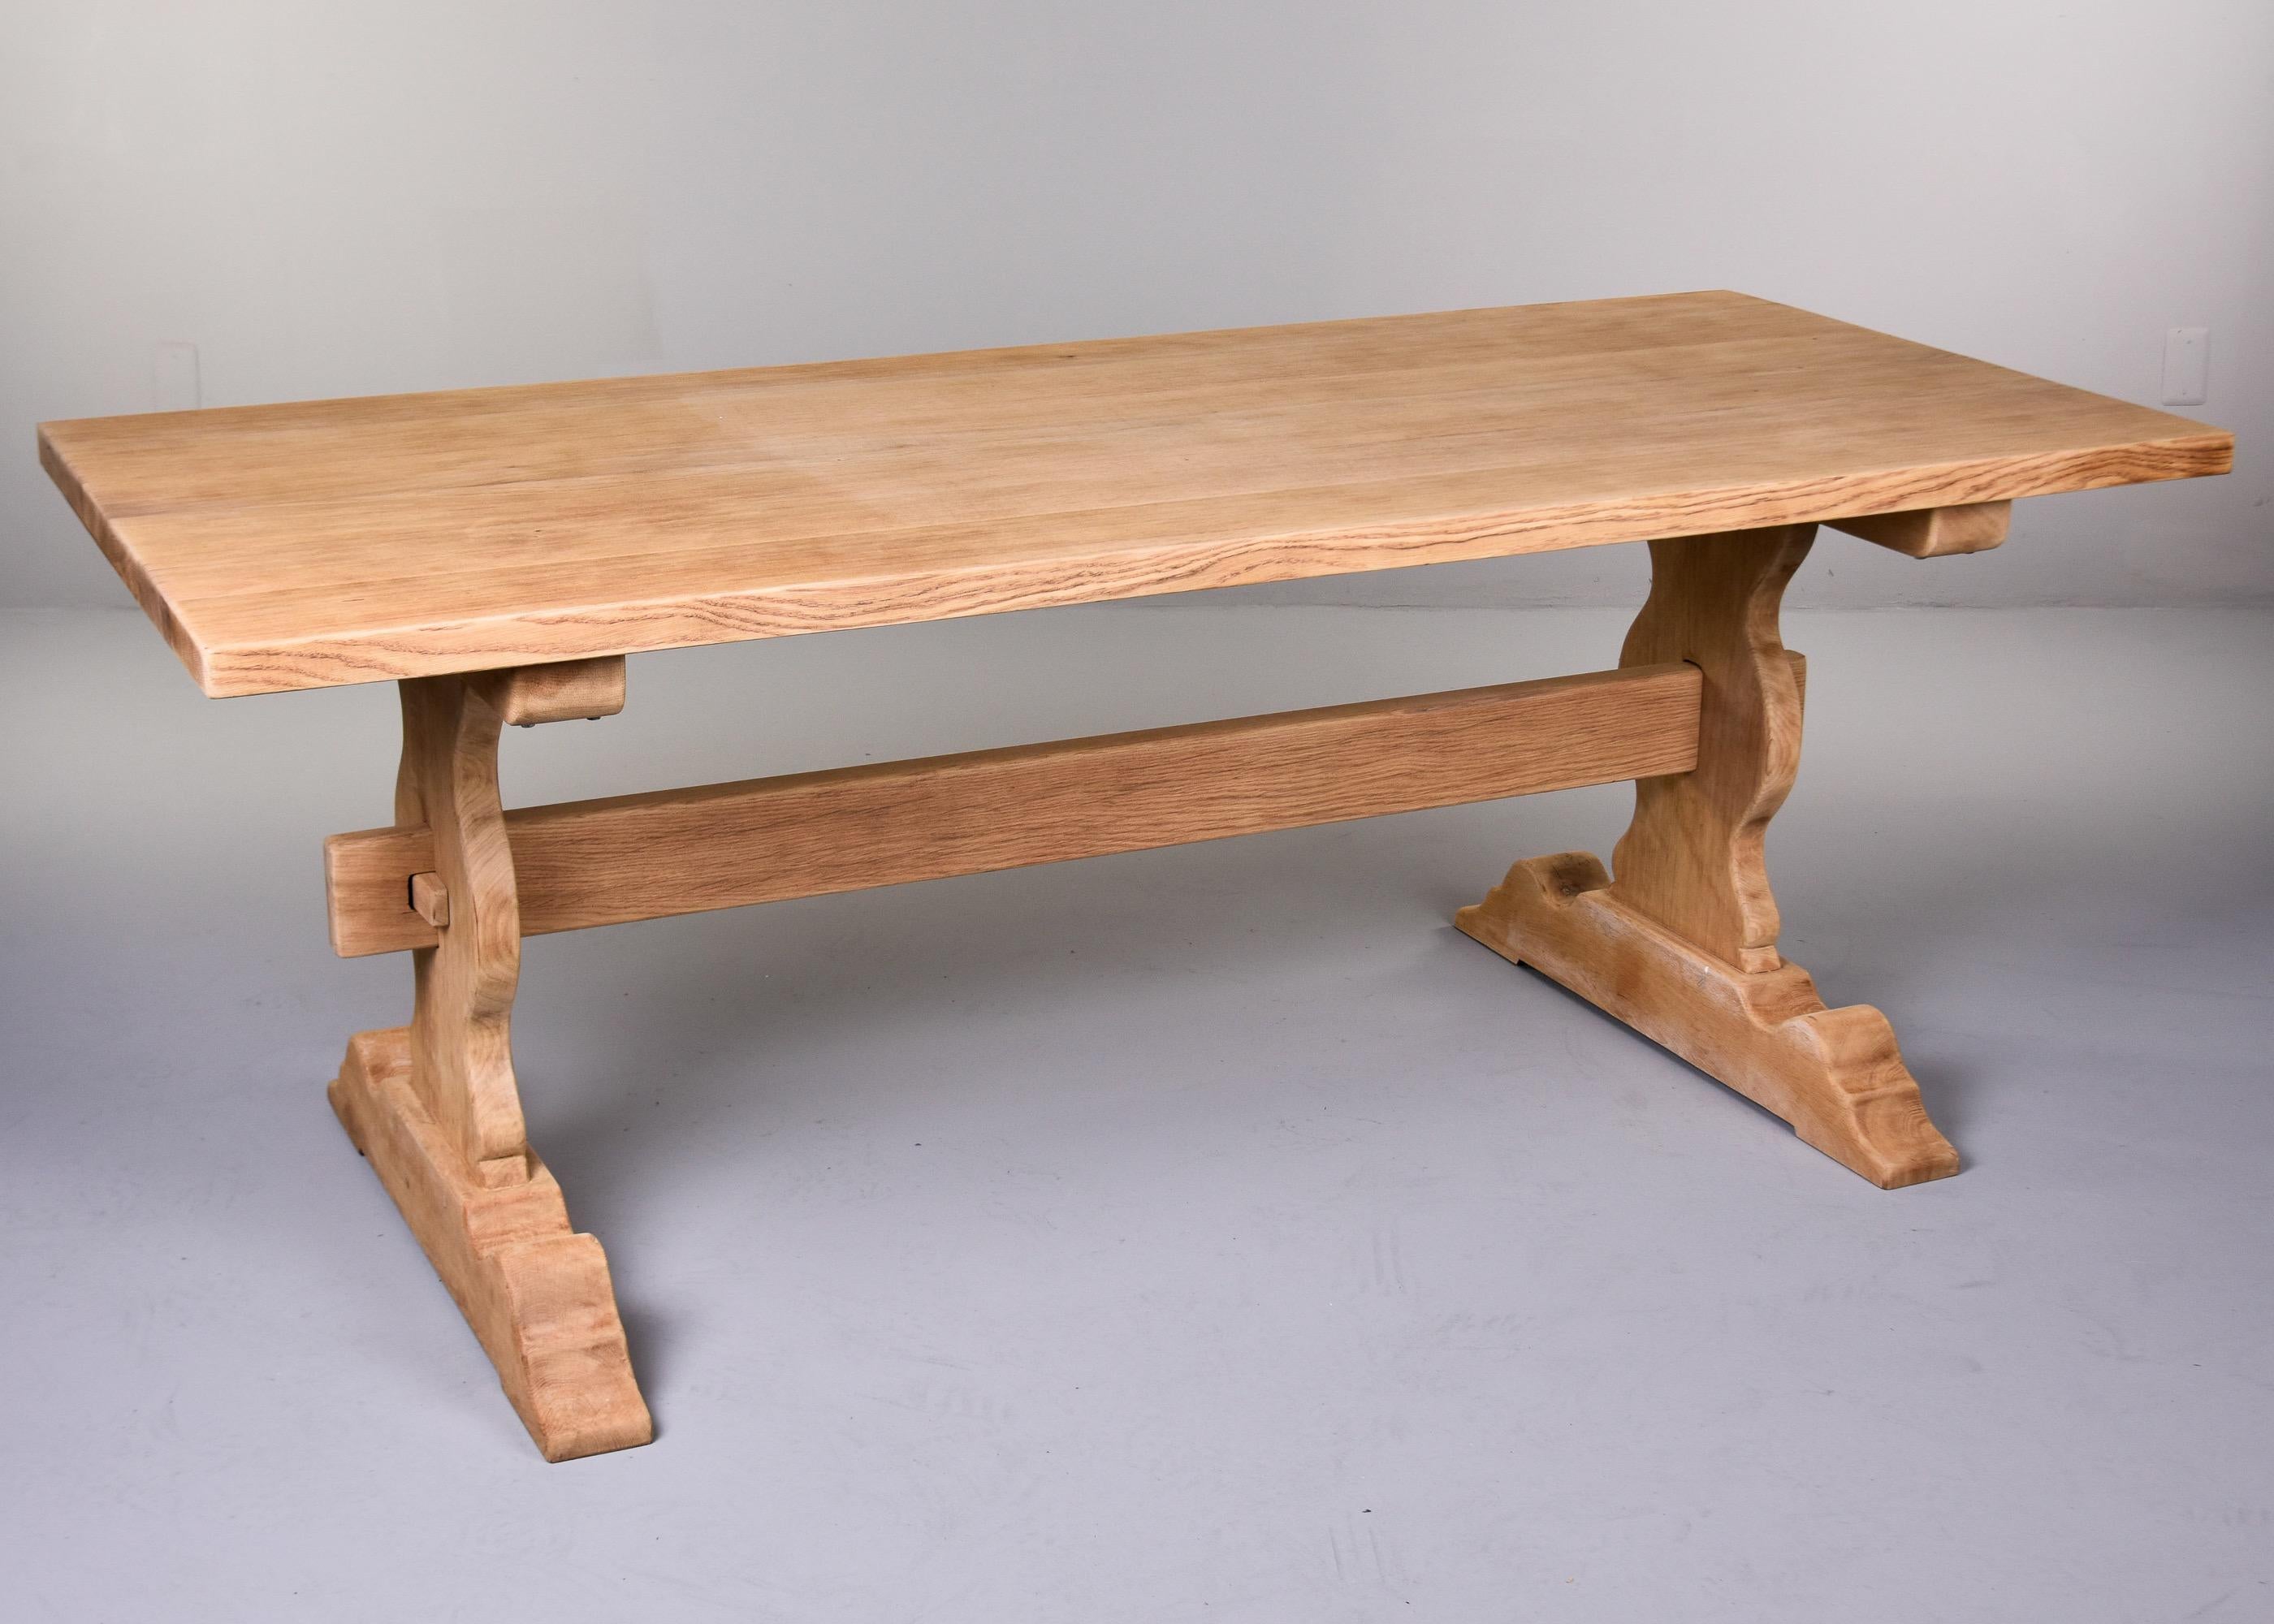 Circa 1900 French Bleached and Bare Sanded Trestle Table In Good Condition For Sale In Troy, MI